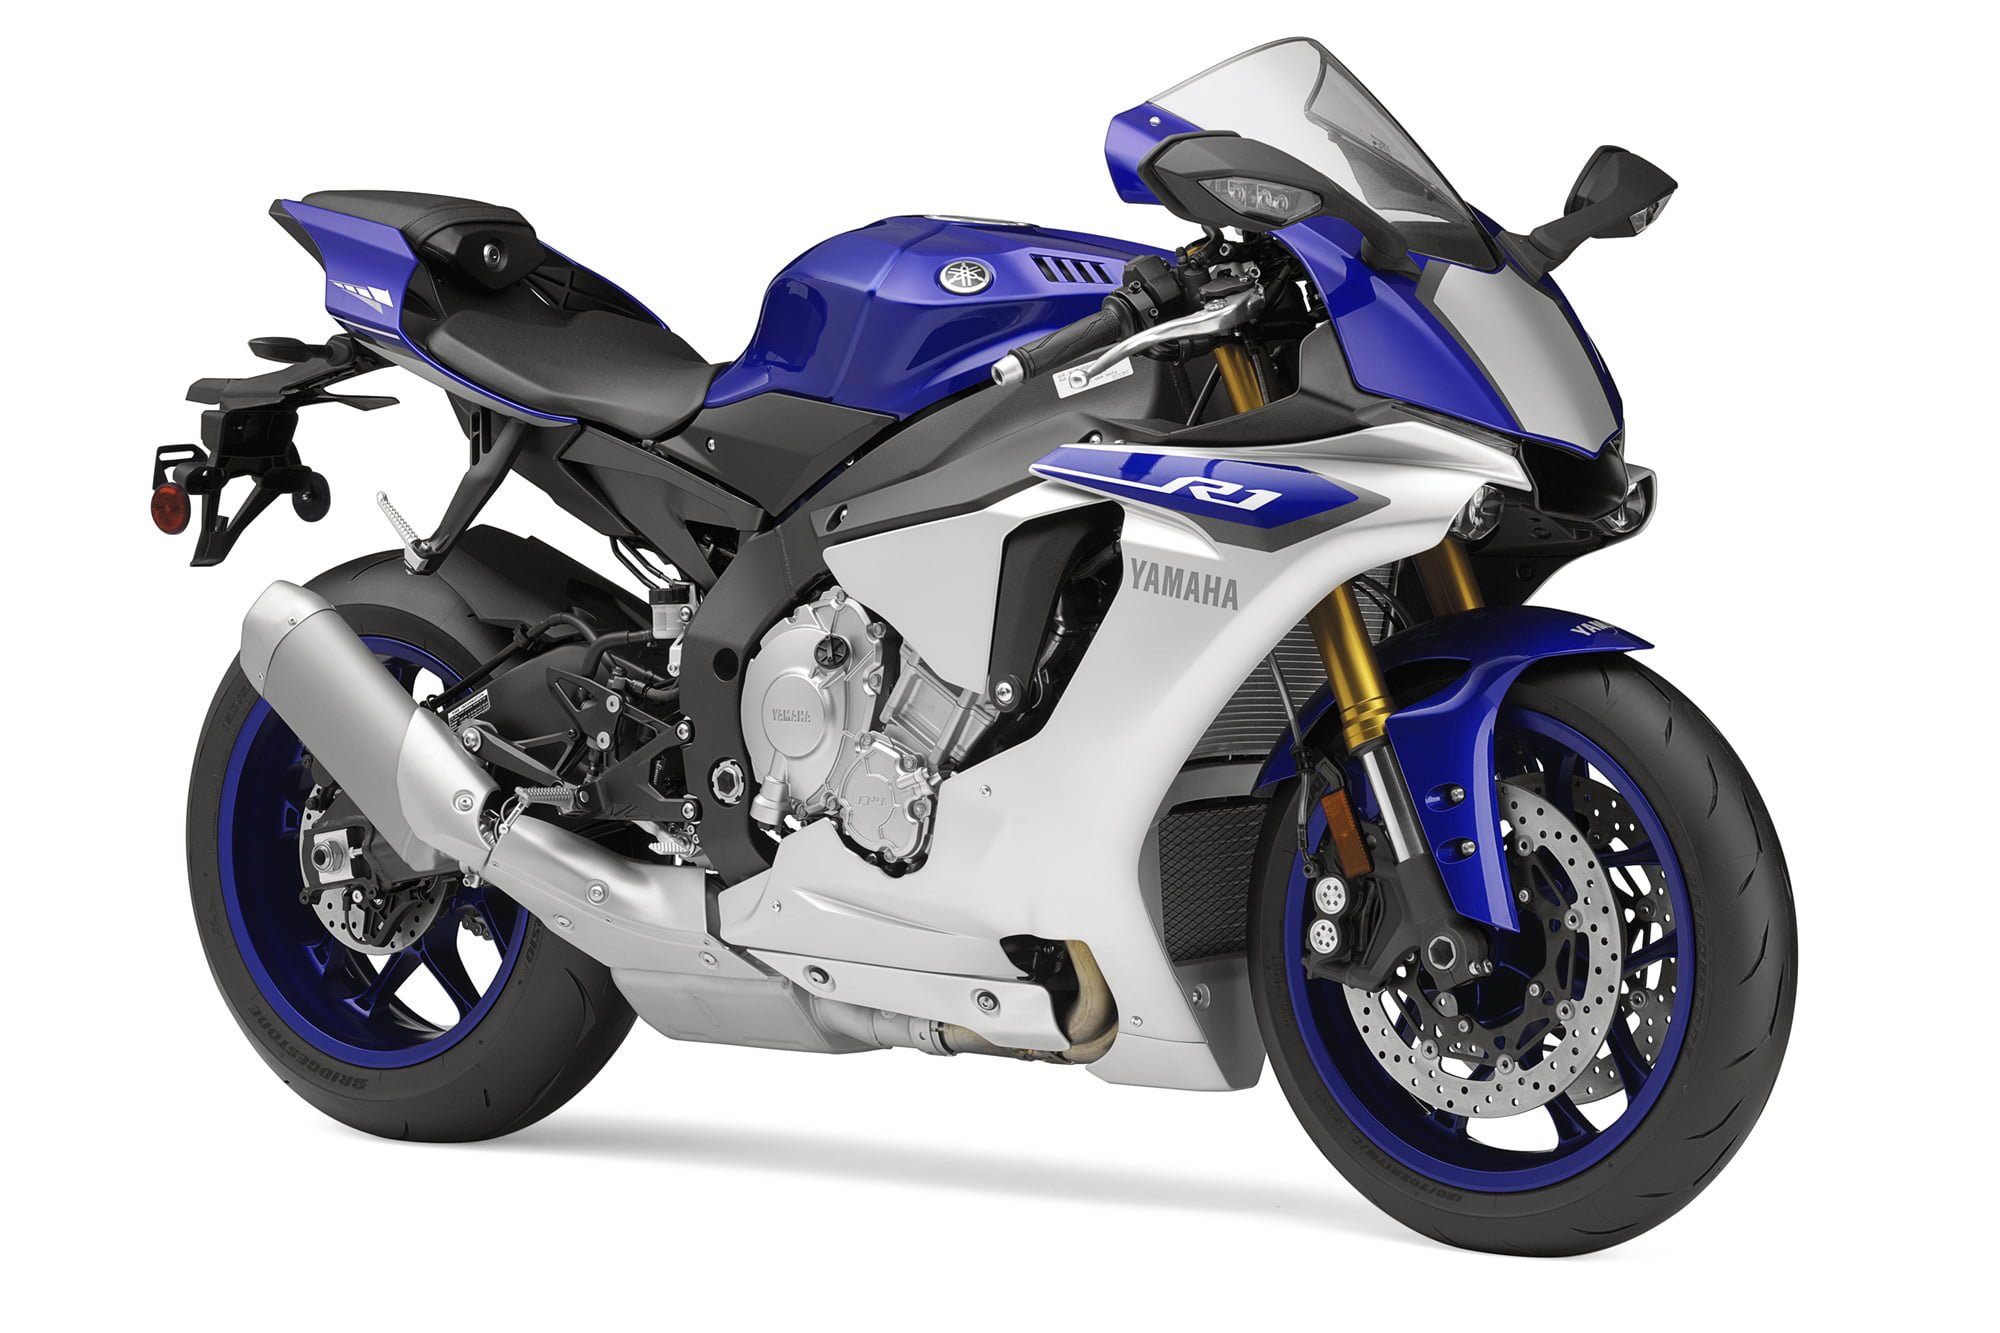 2015 Yamaha R1 Unveiled At EICMA: First Look, Specs & Price